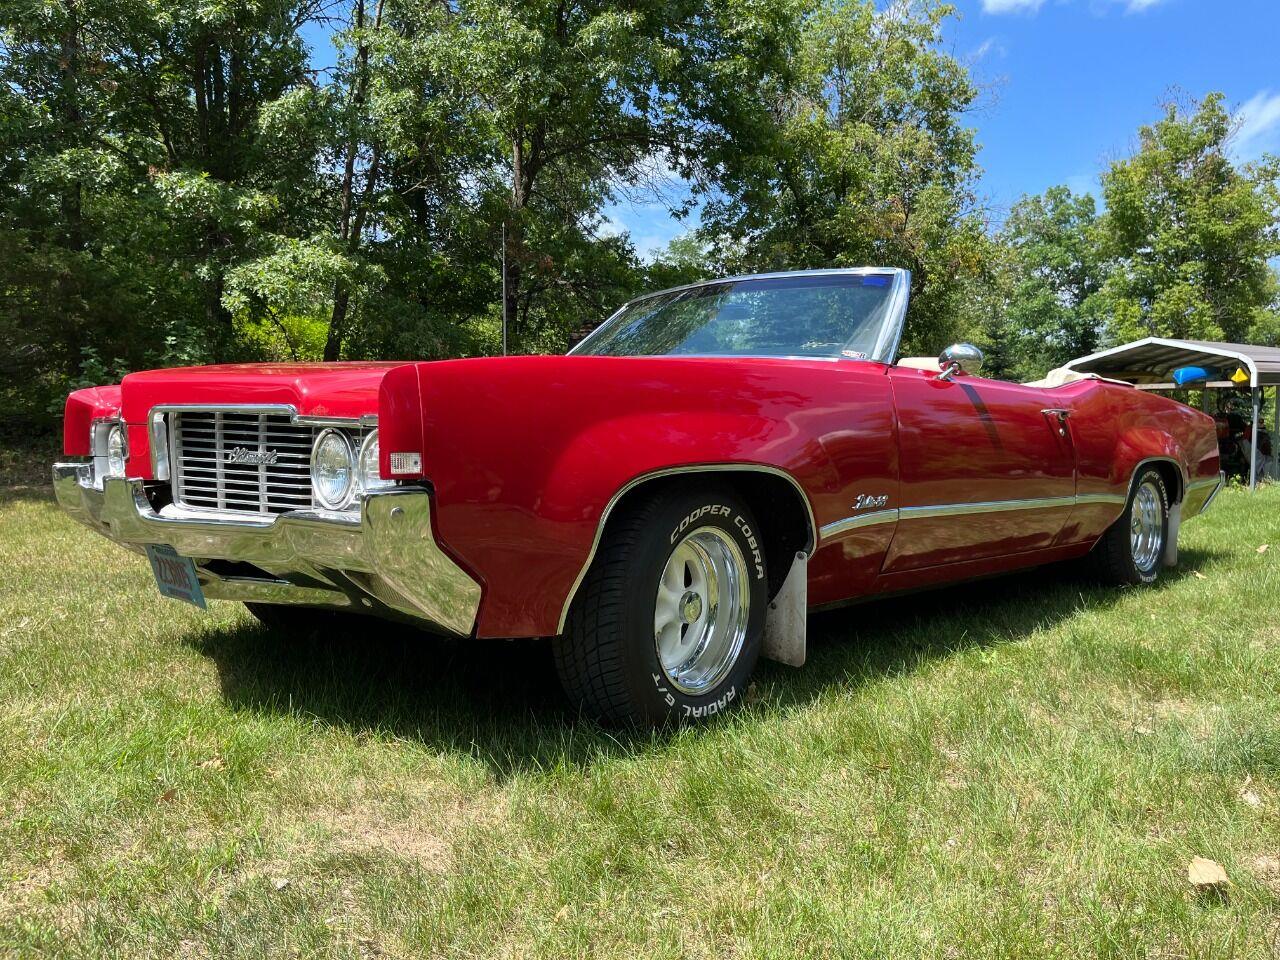 For Sale: 1969 Oldsmobile Delta 88 in Stanley, Wisconsin for sale in Stanley, WI